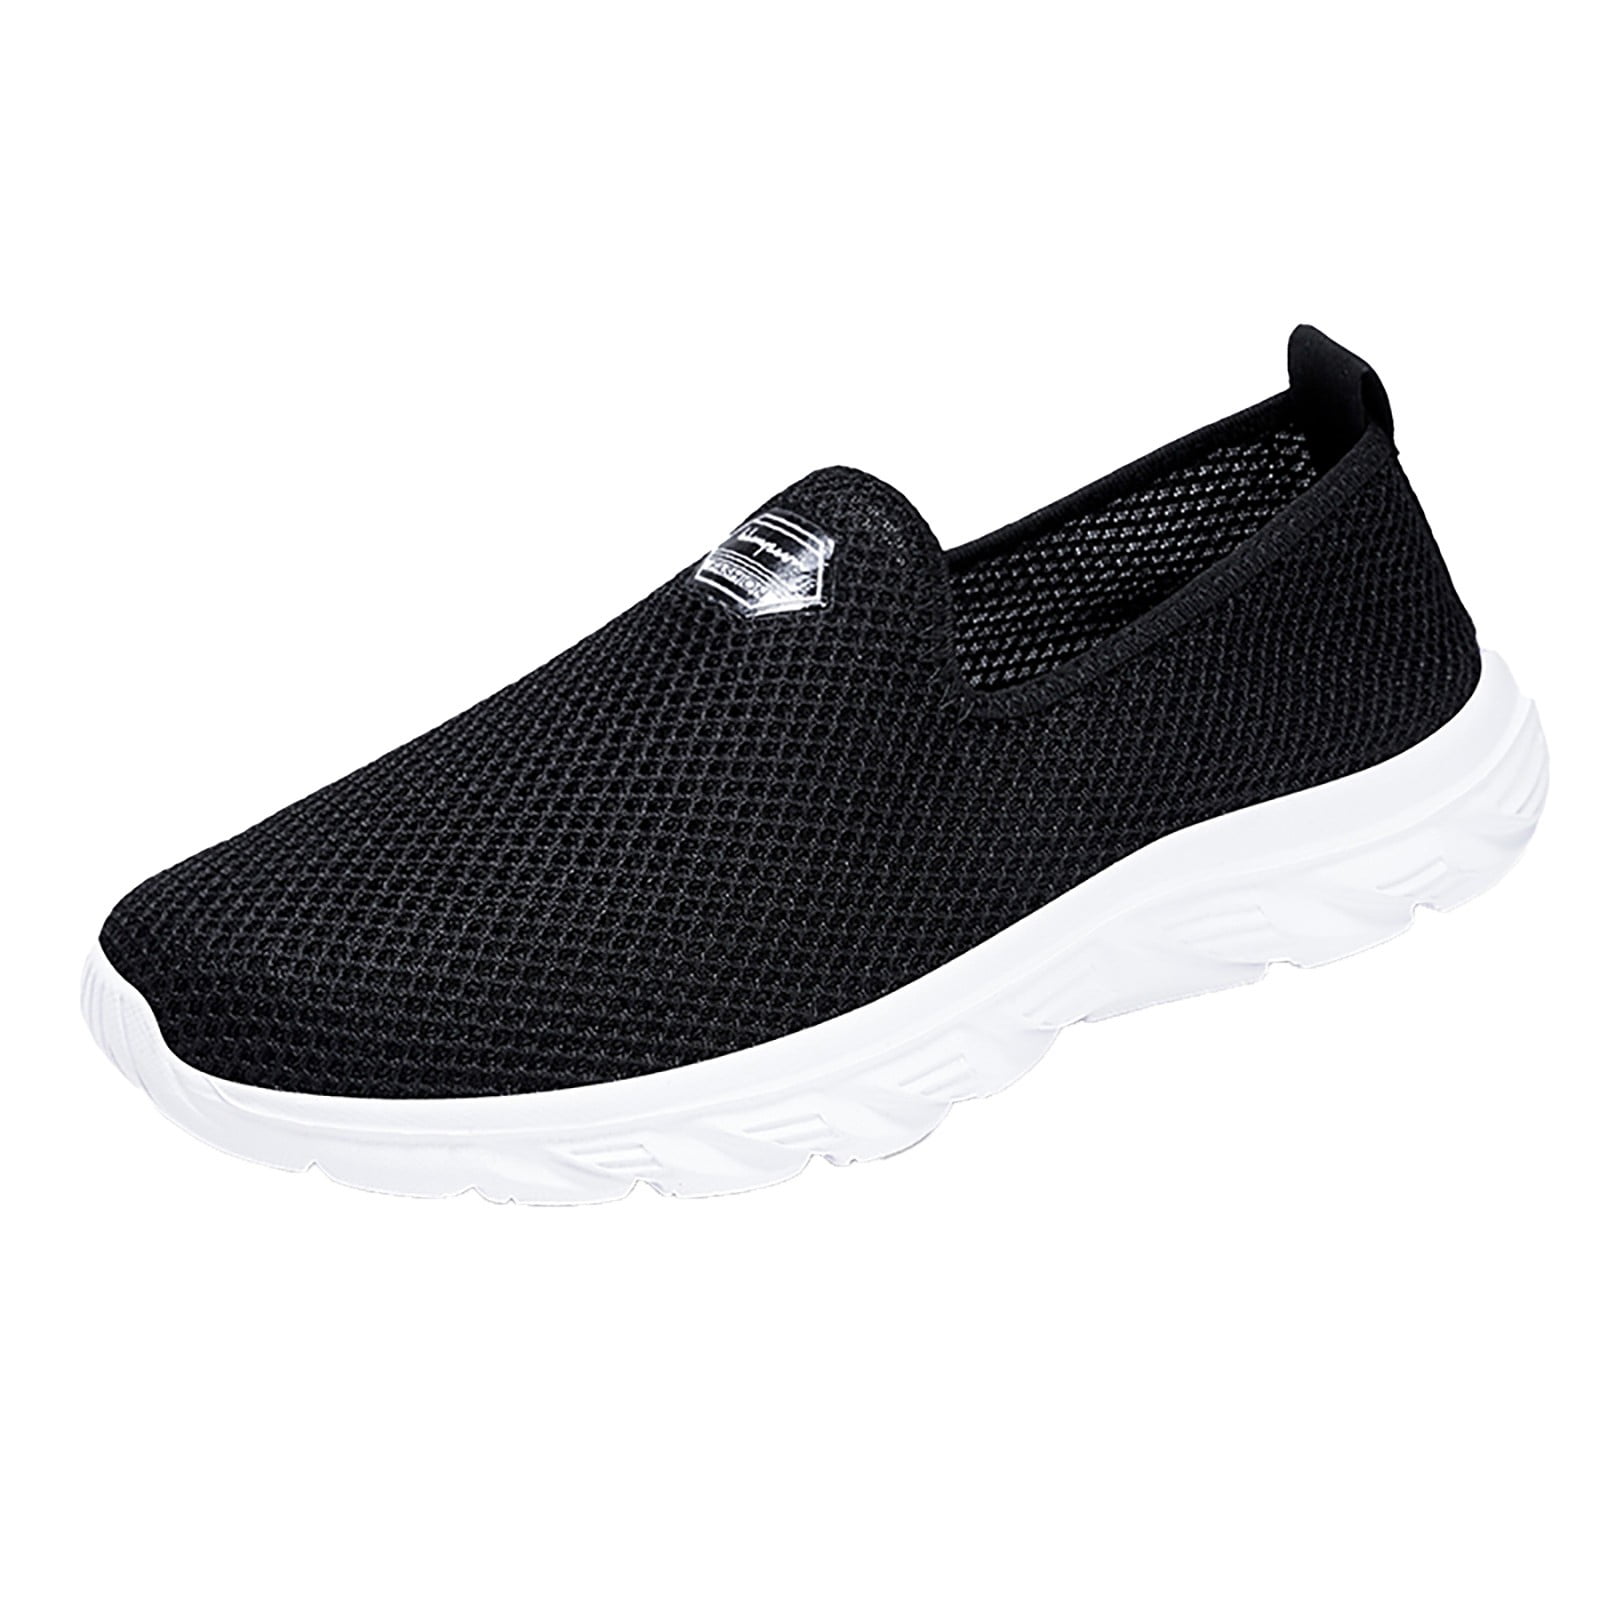 Mens Flat Athletic Hollow Out Breathable Loafers Slip-On Mesh Summer Casual Shoe